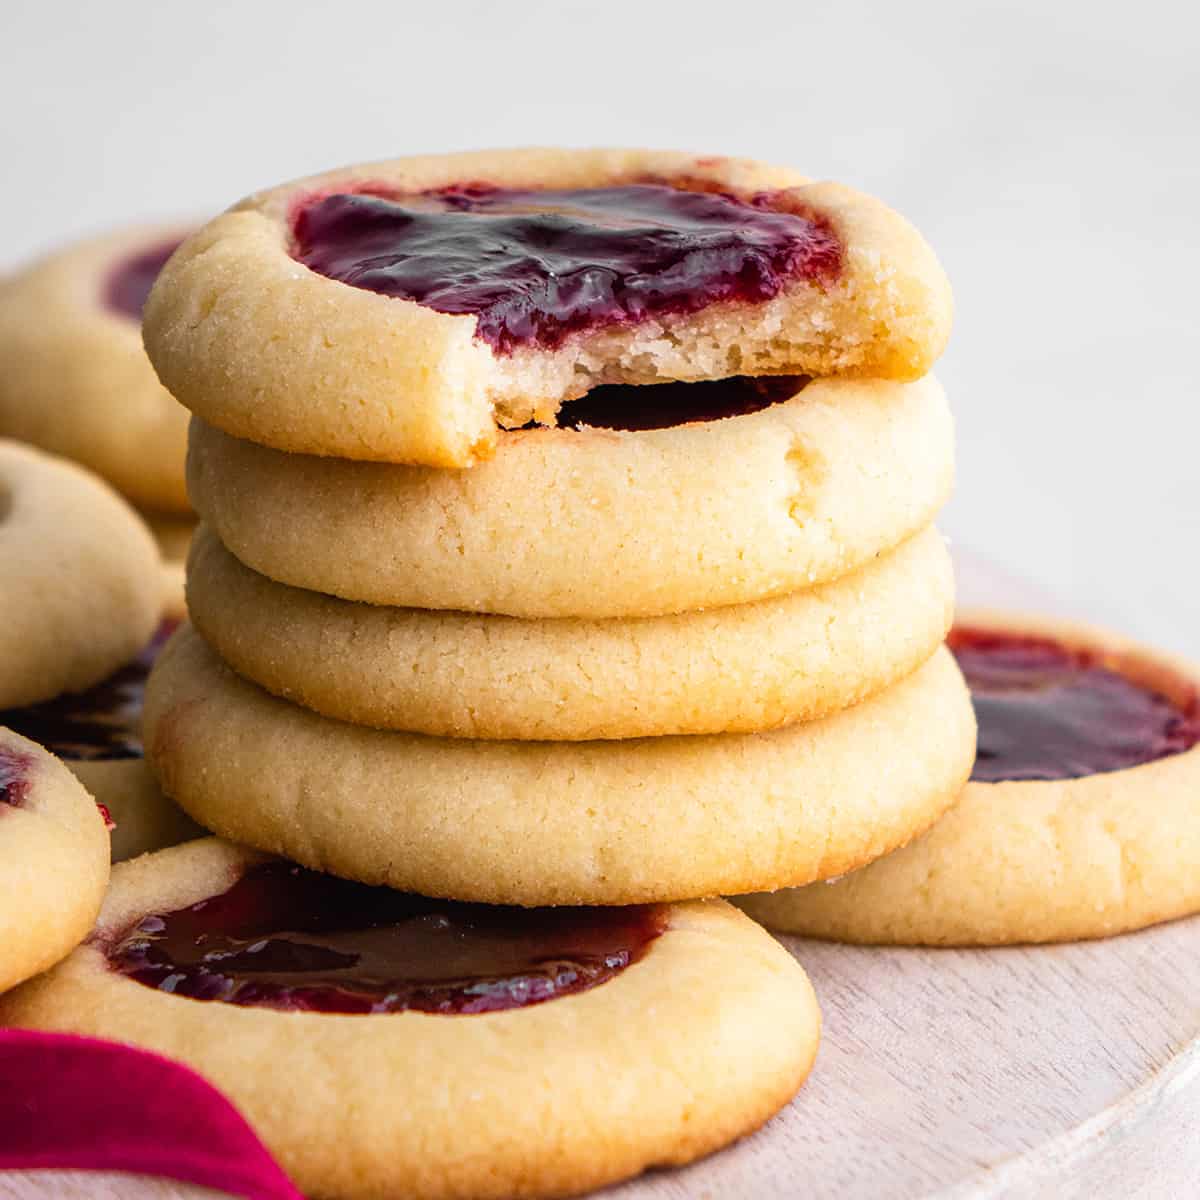 stack of four raspberry thumbprint cookies, the top one has a bite taken out of it